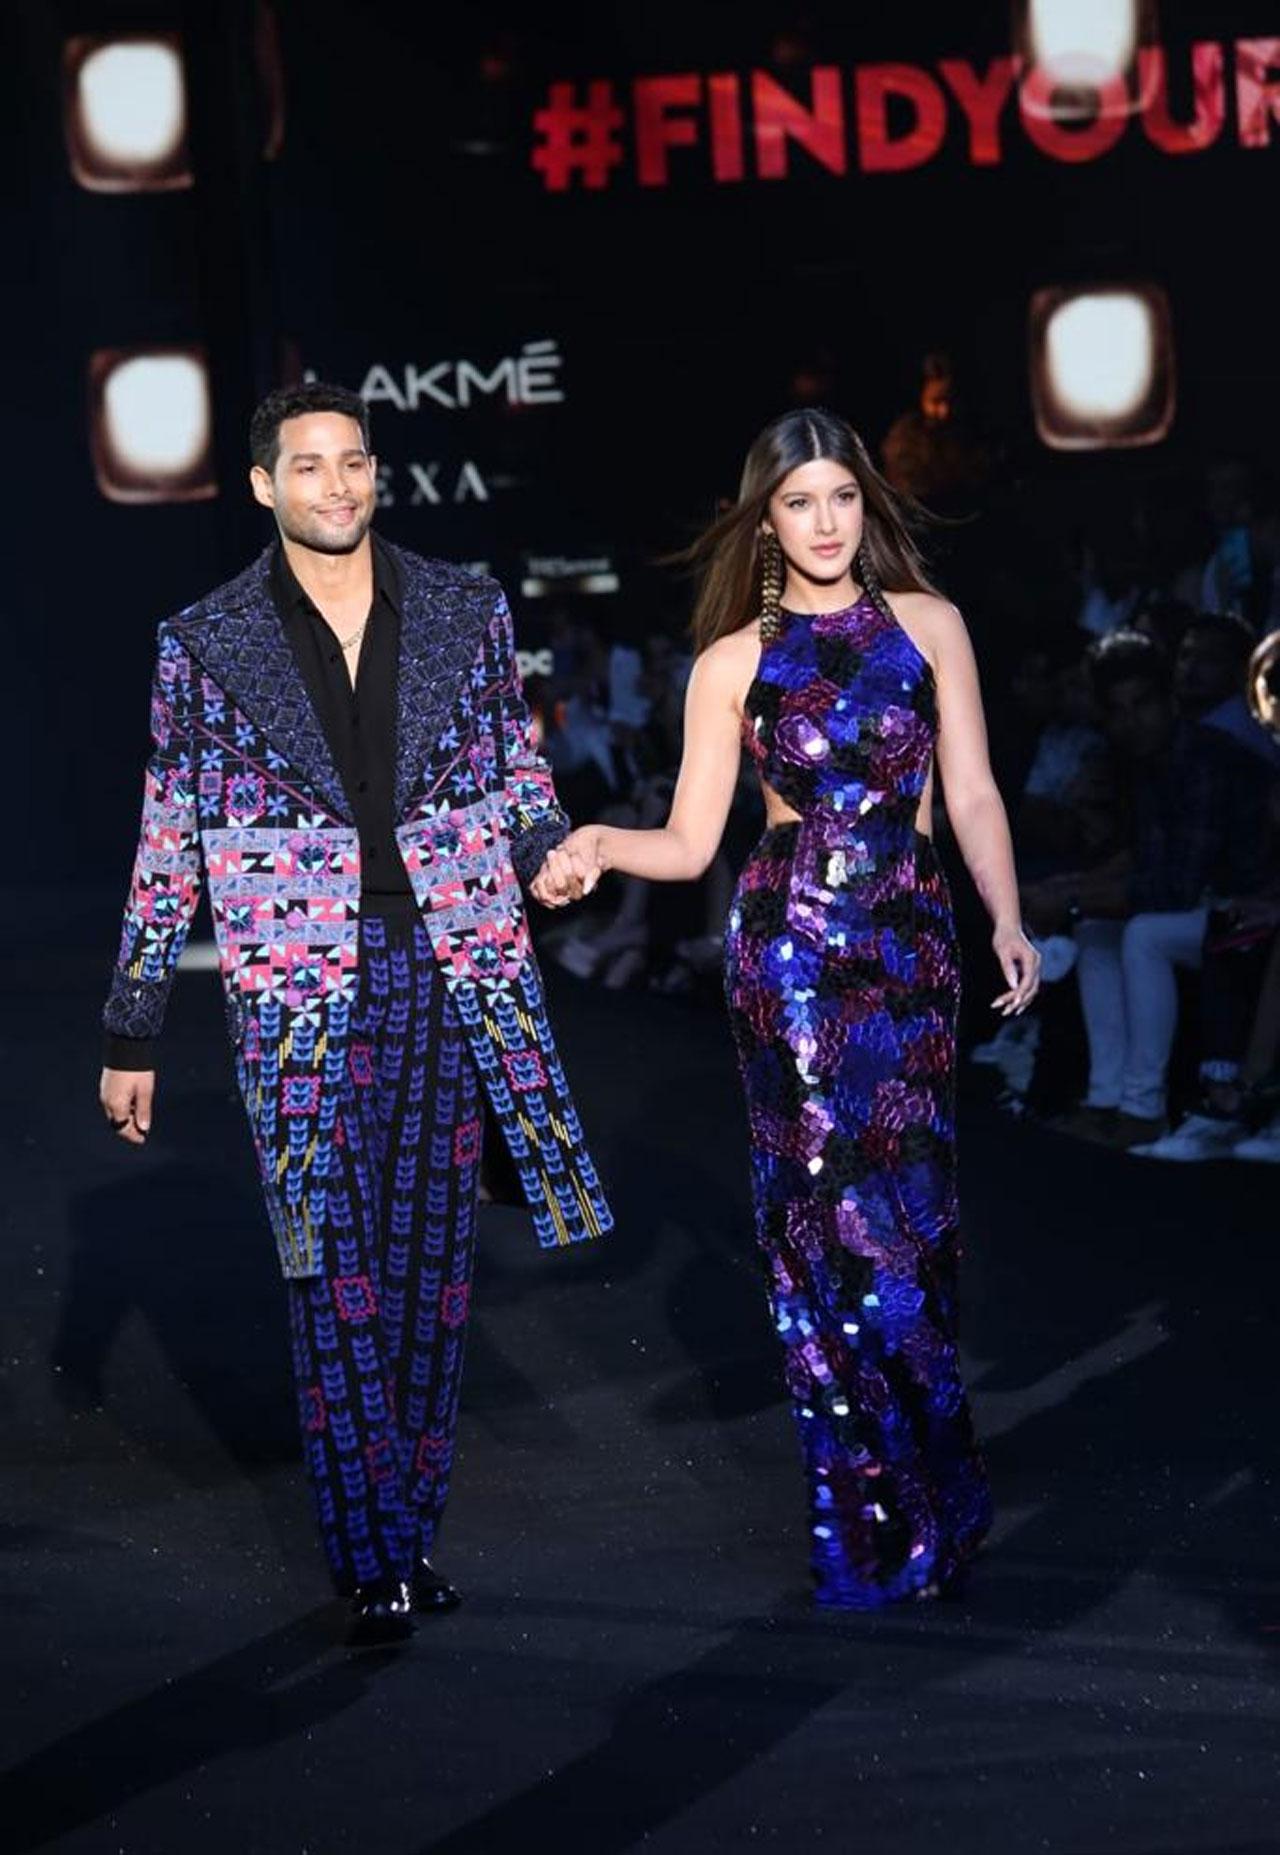 Actor Siddhant Chaturvedi recently made heads turns by walking the ramp with debutant Shanaya Kapoor at the Lakme Fashion Week in Delhi. Opening up about his ramp walk, Siddhanth revealed that he was extremely nervous before hitting the runway. He said, 